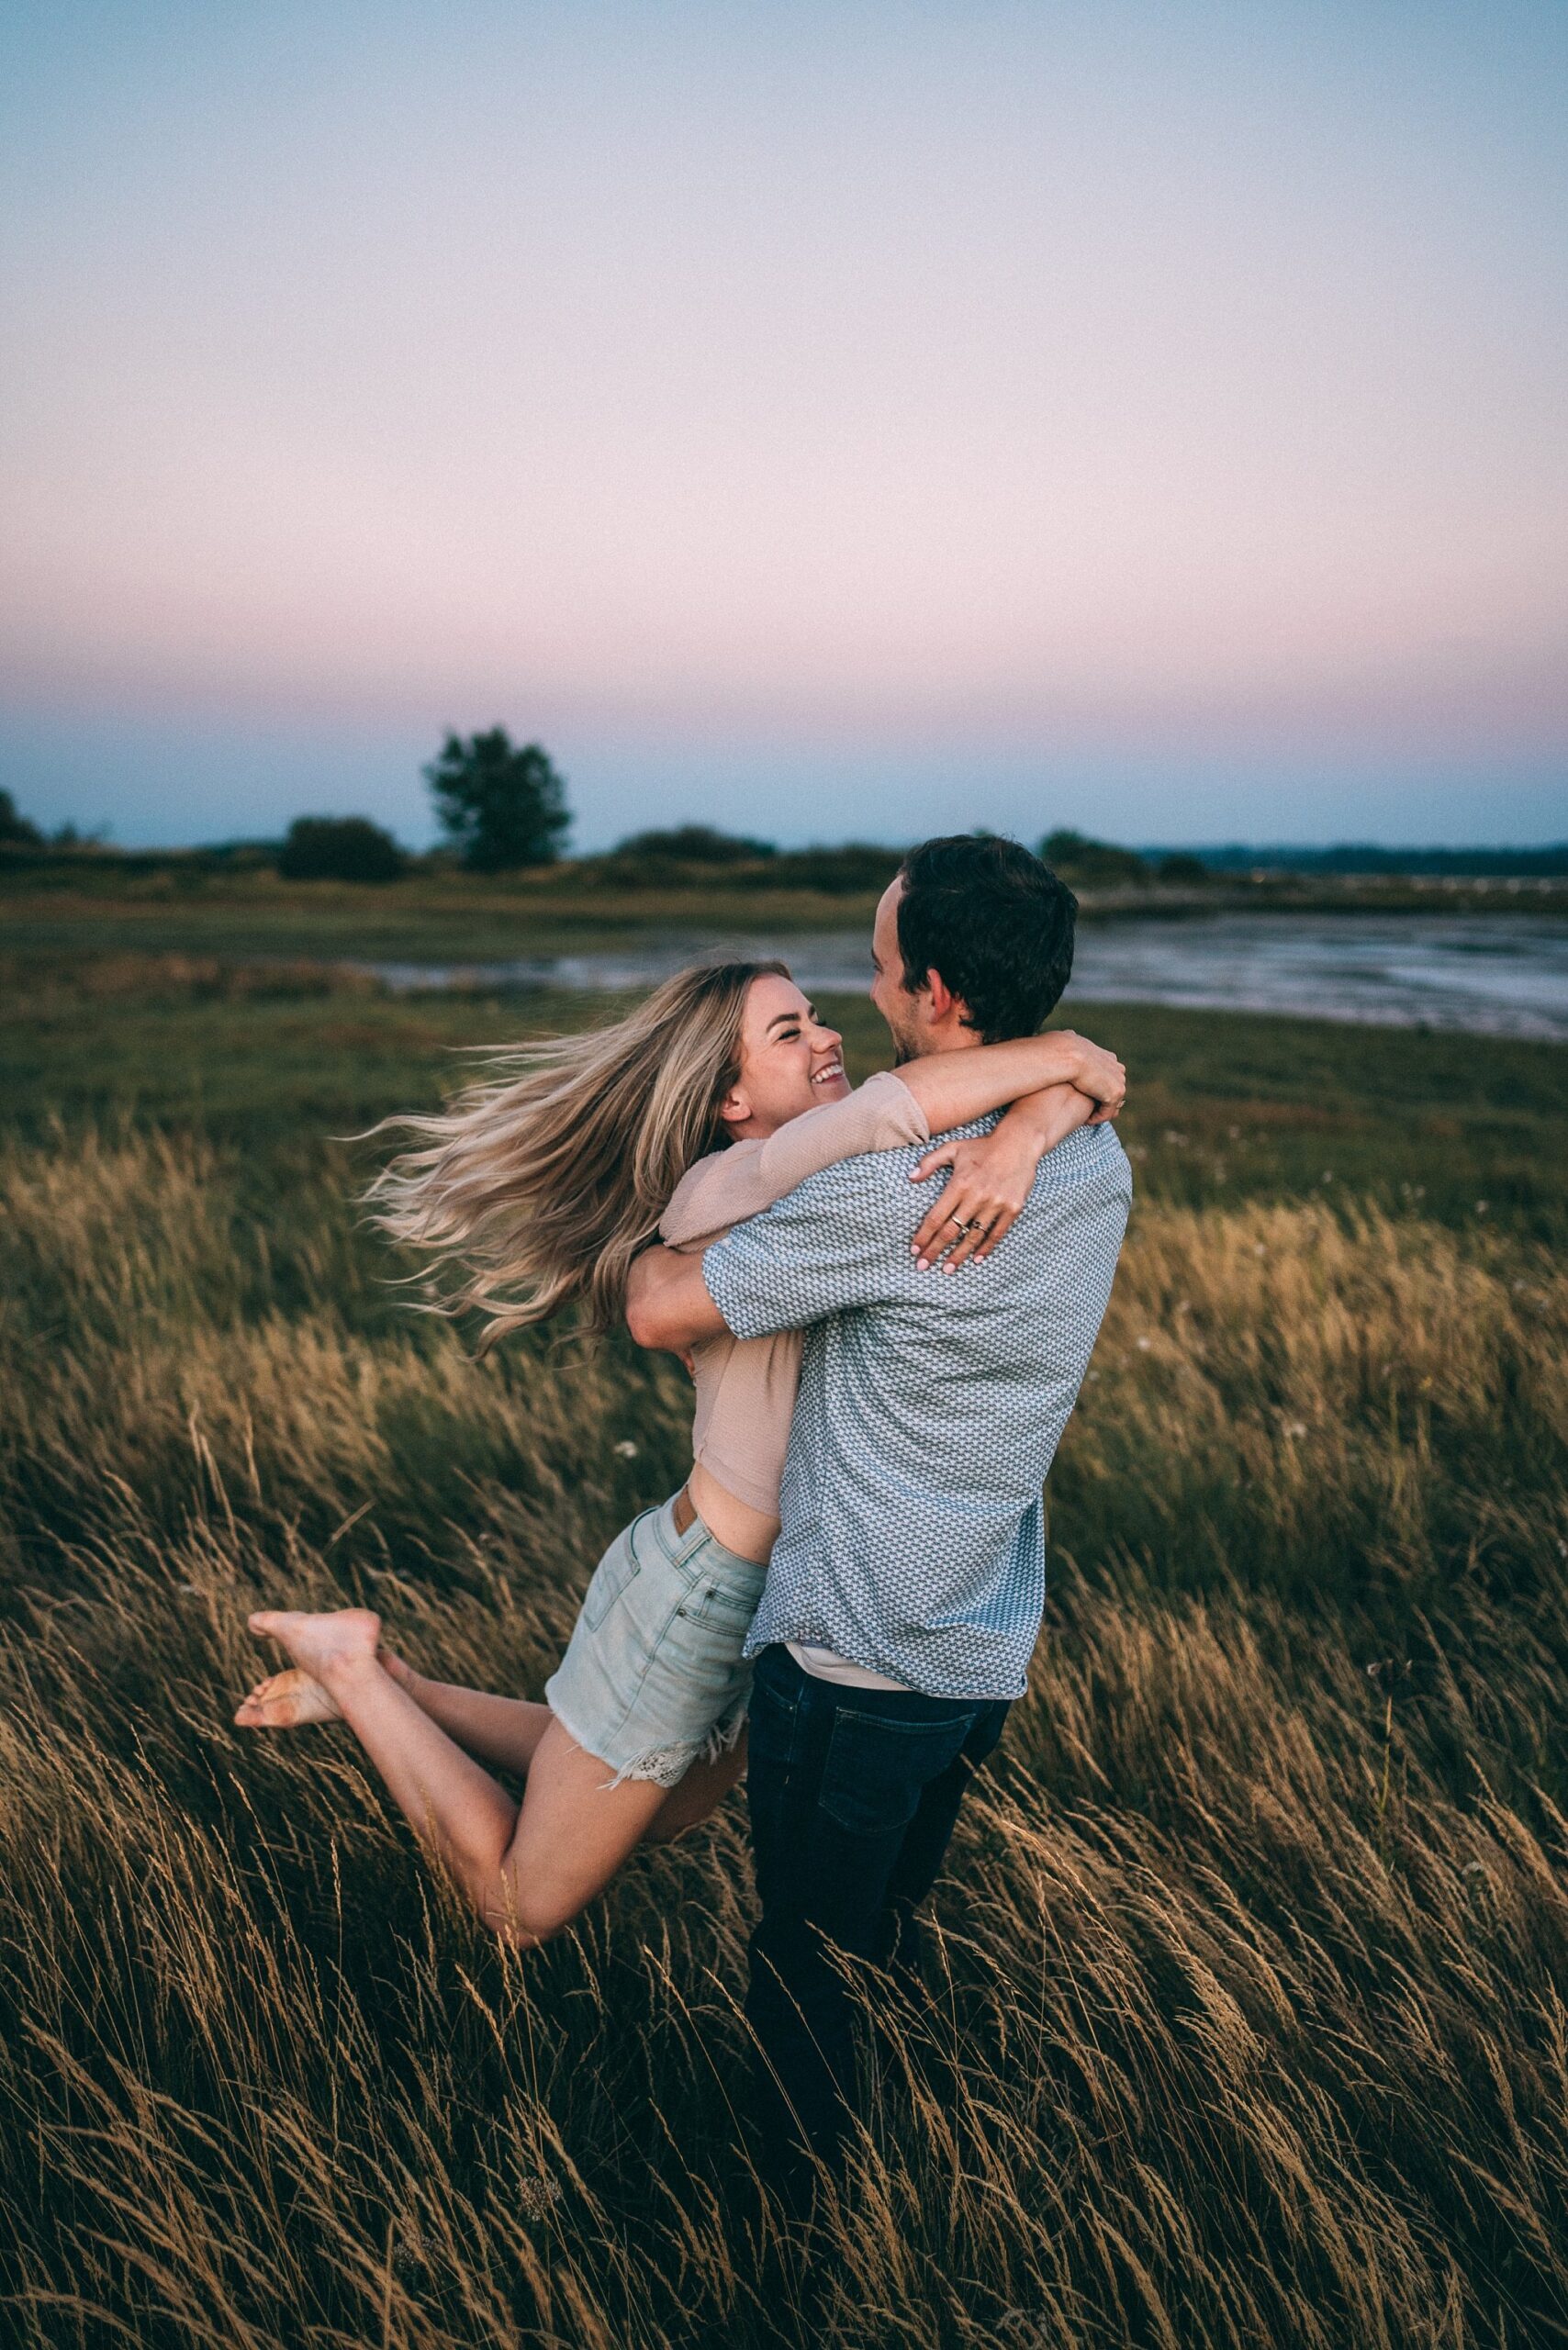 man swinging woman in his arms in long grass